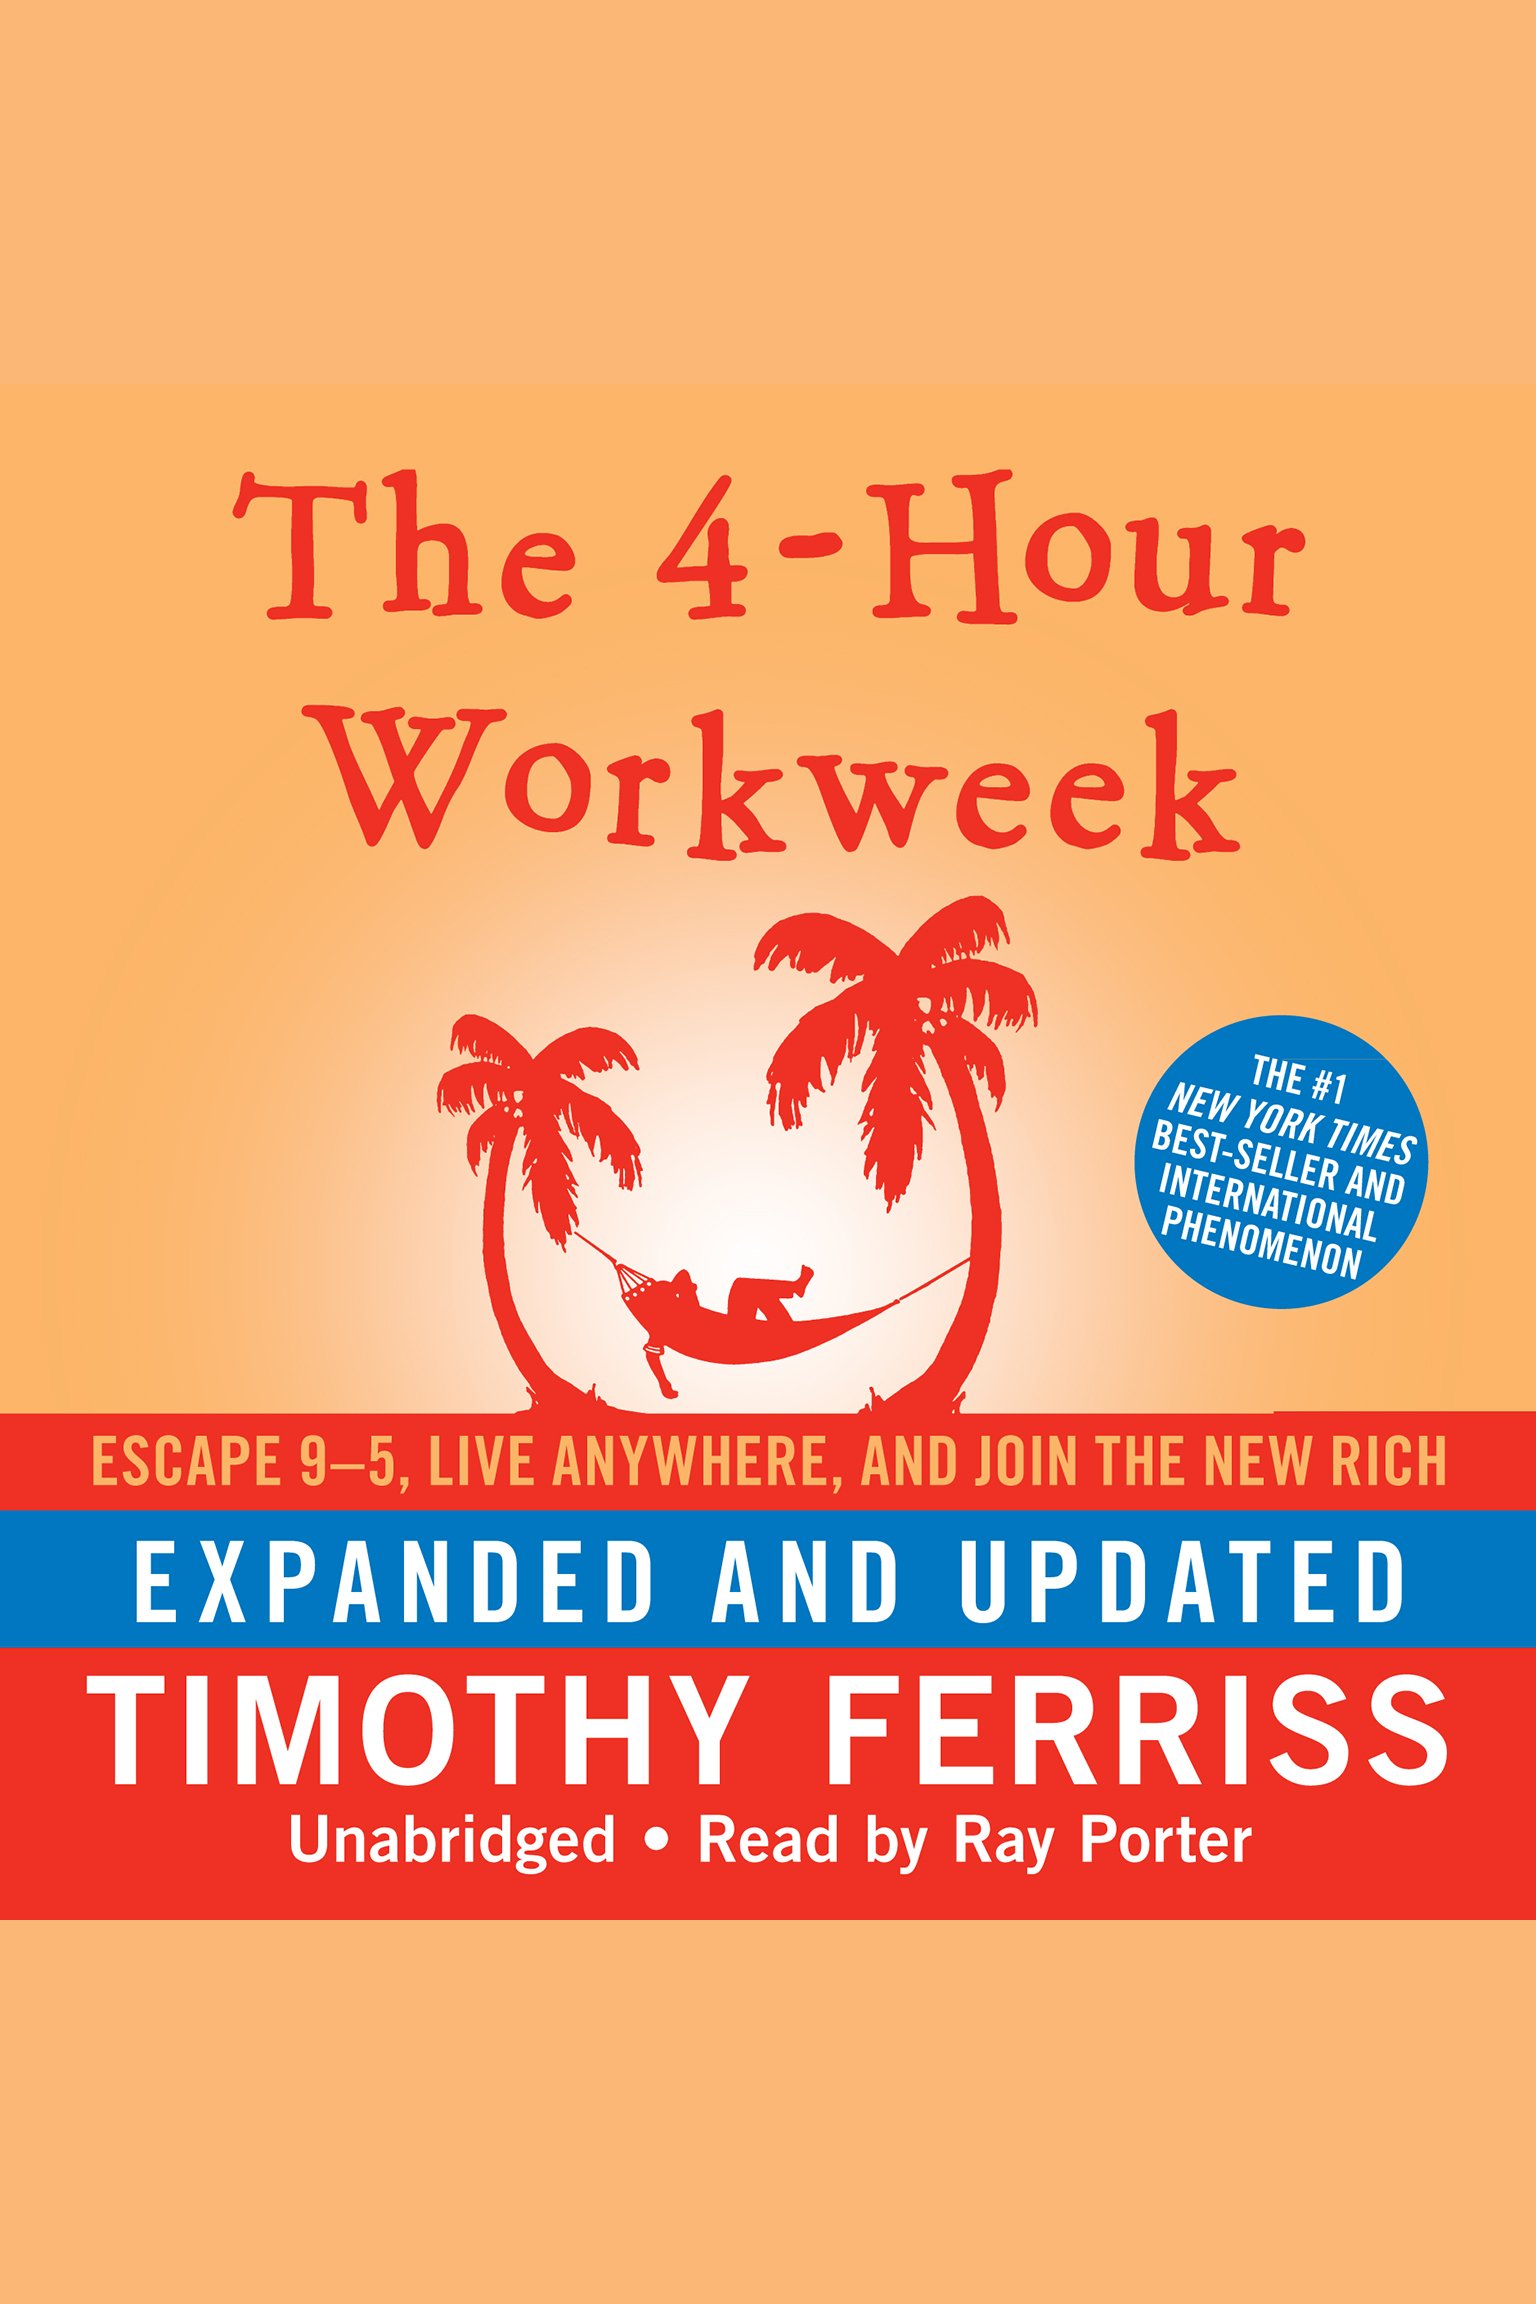 Image de couverture de "The 4-Hour Workweek, Expanded and Updated" [electronic resource] :